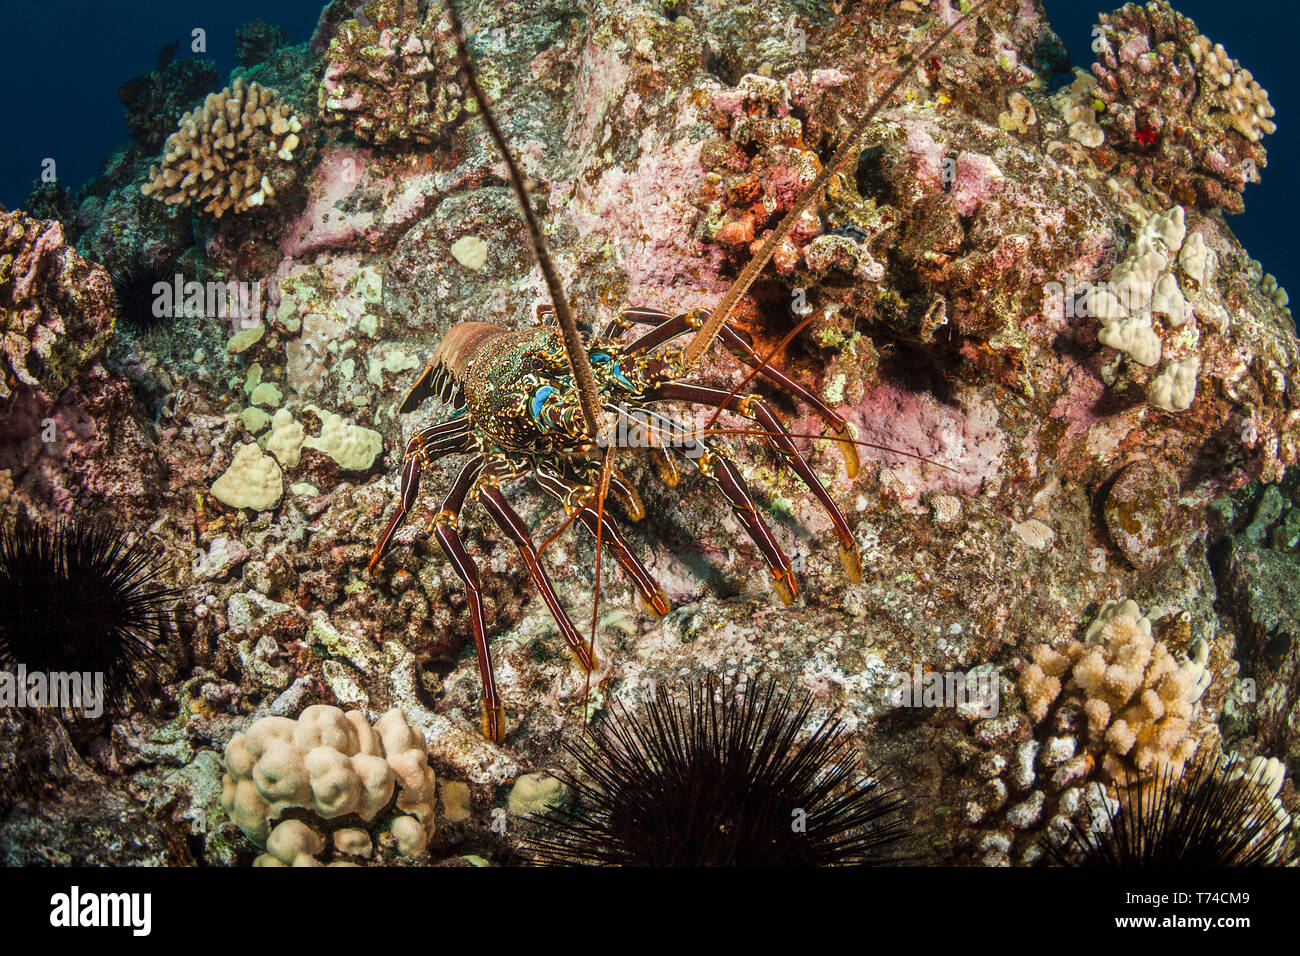 Pacific spiny lobster (Palinuridae) on a colourful reef; Island of Hawaii, Hawaii, United States of America Stock Photo